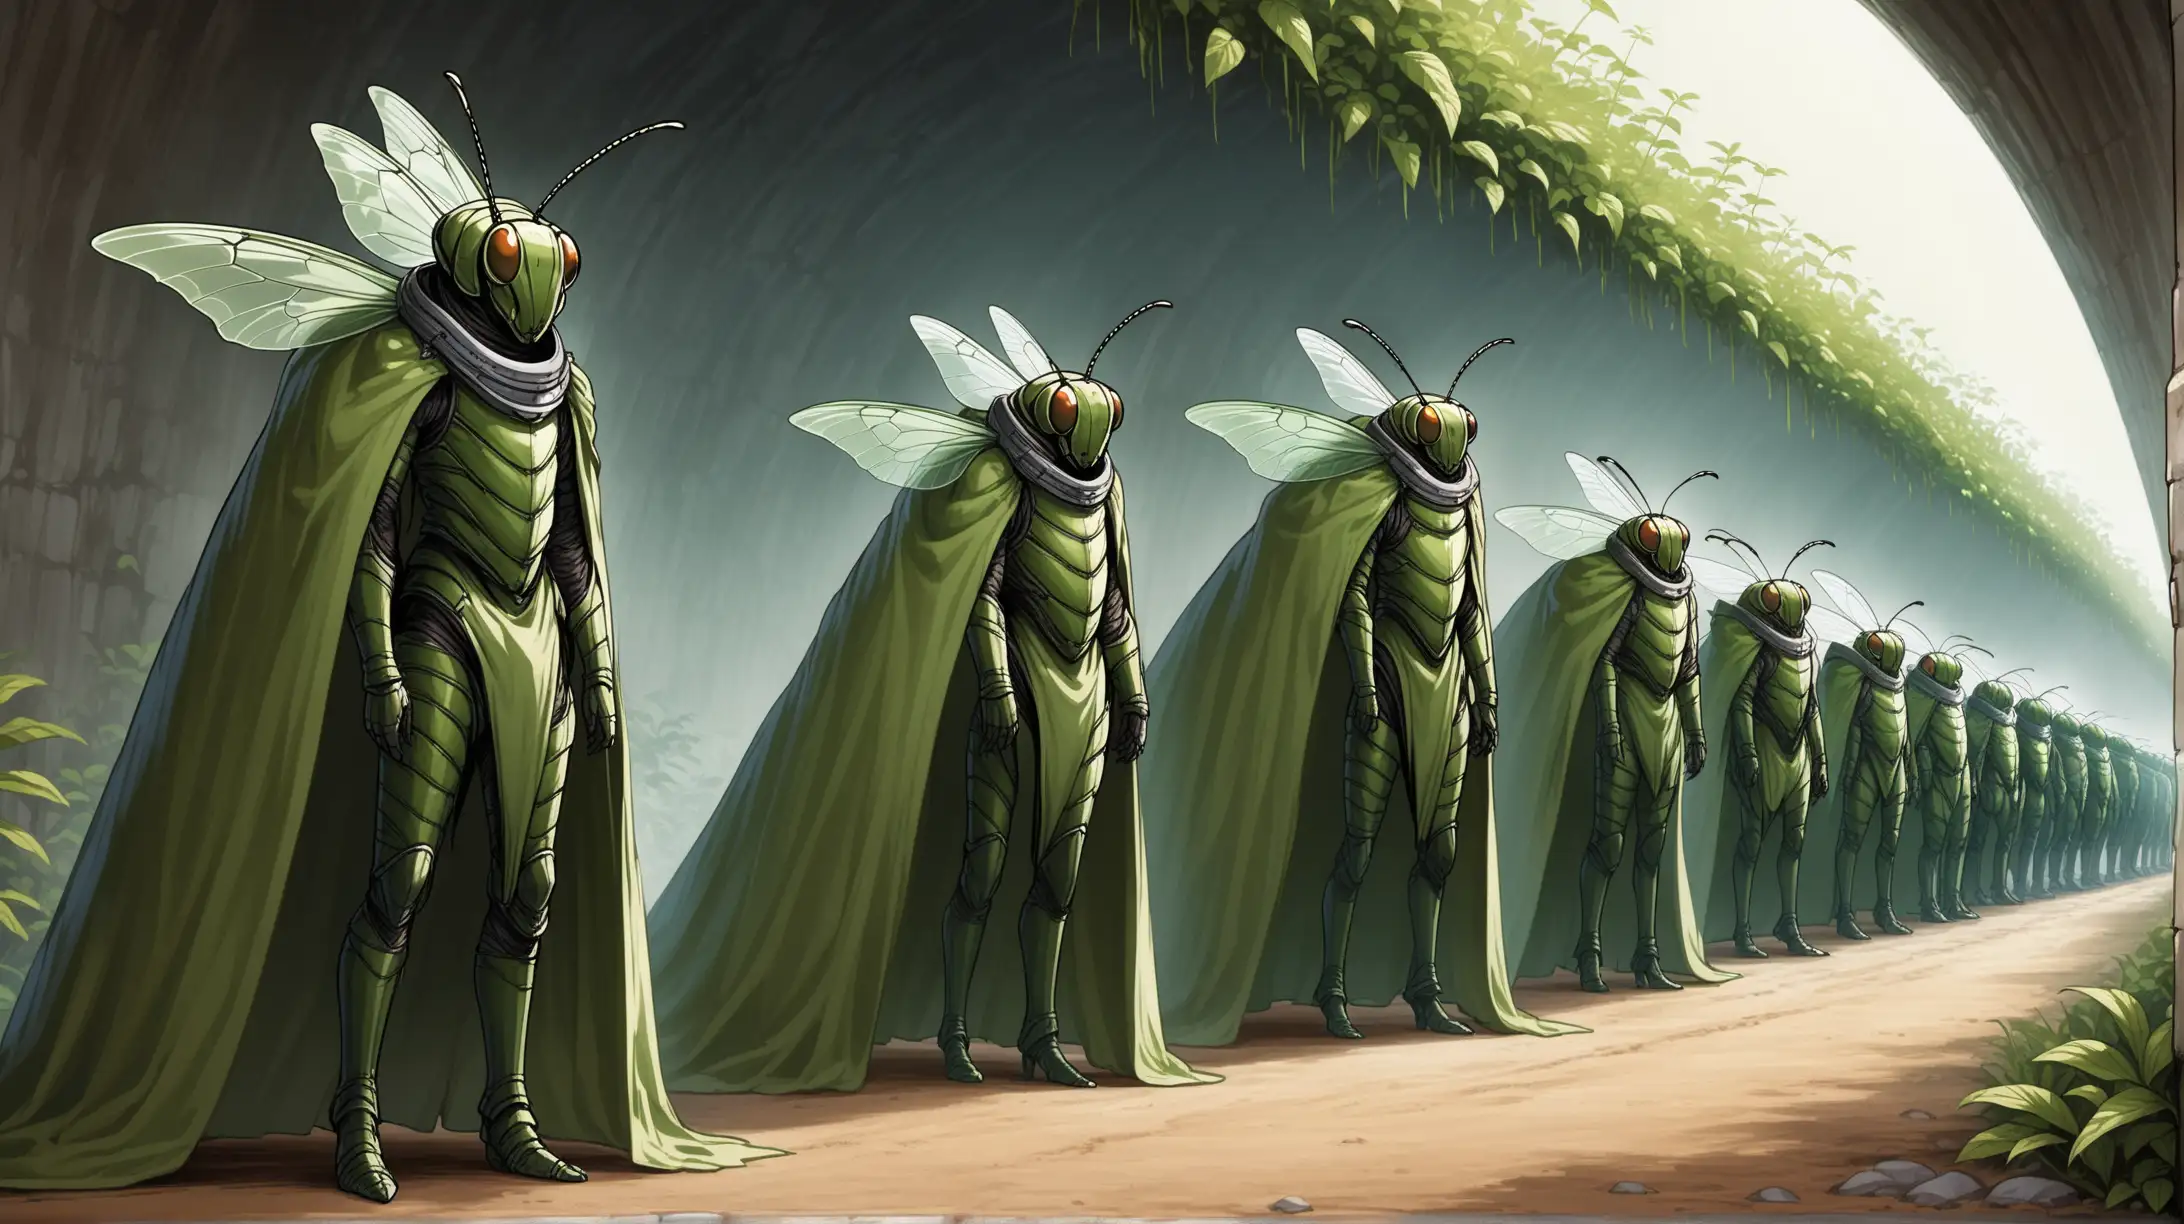 Medieval Fantasy Colony LineUp of Male and Female Humanoid Insect People in Tunnel Setting